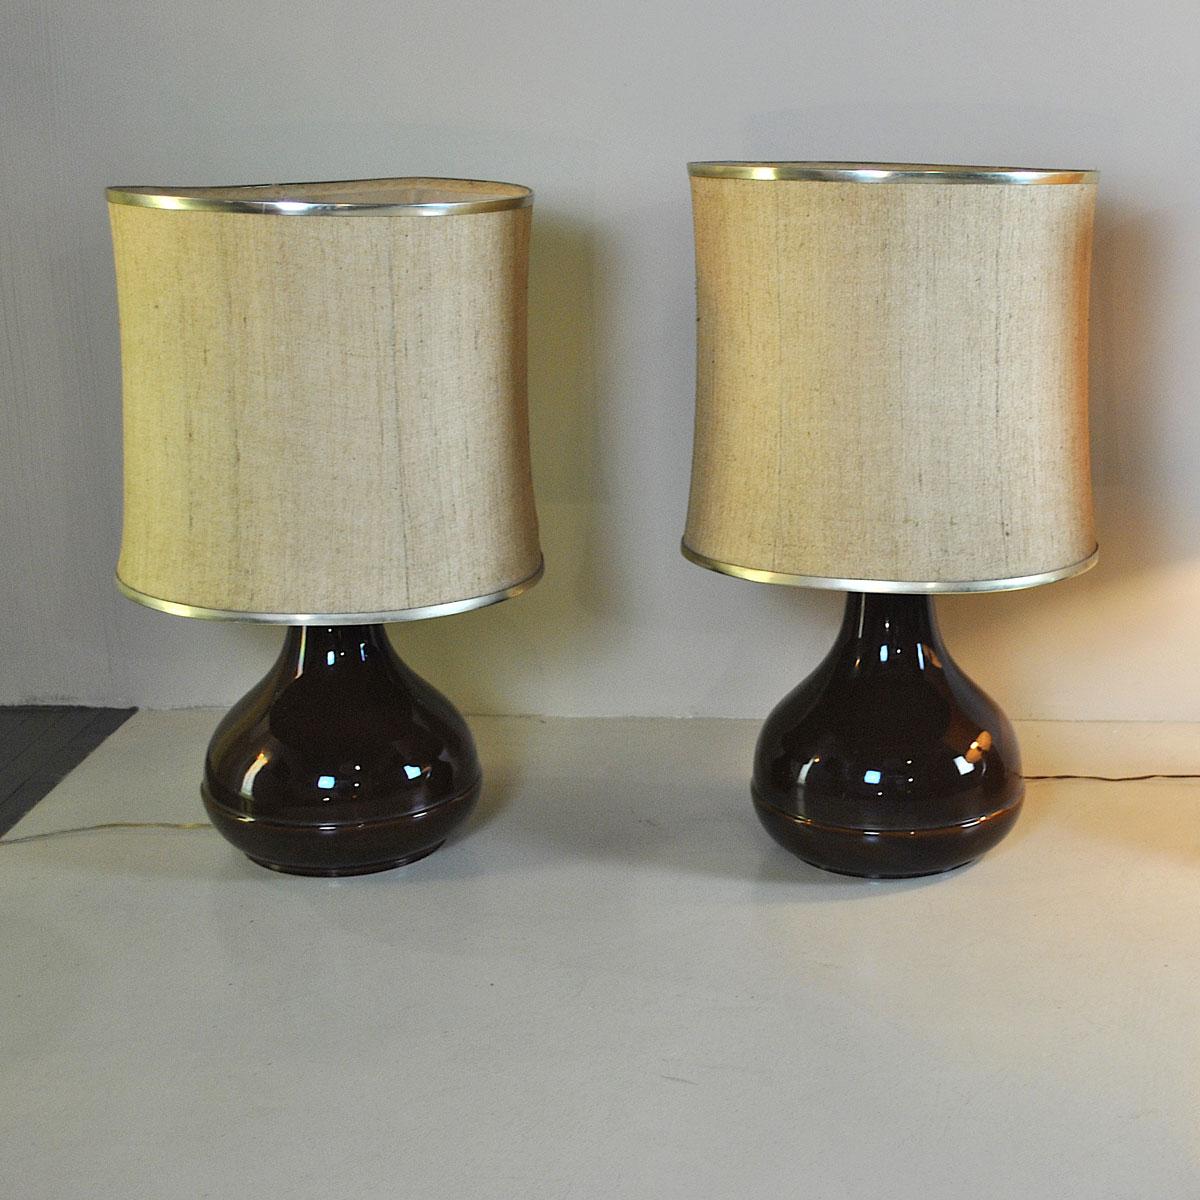 Ferlaro ceramic Italian midcentury table lamp from the 1960s

The lamp is sold without the lampshade in the picture, but it can be requested in the form, sizes and colors at will with an extra price.